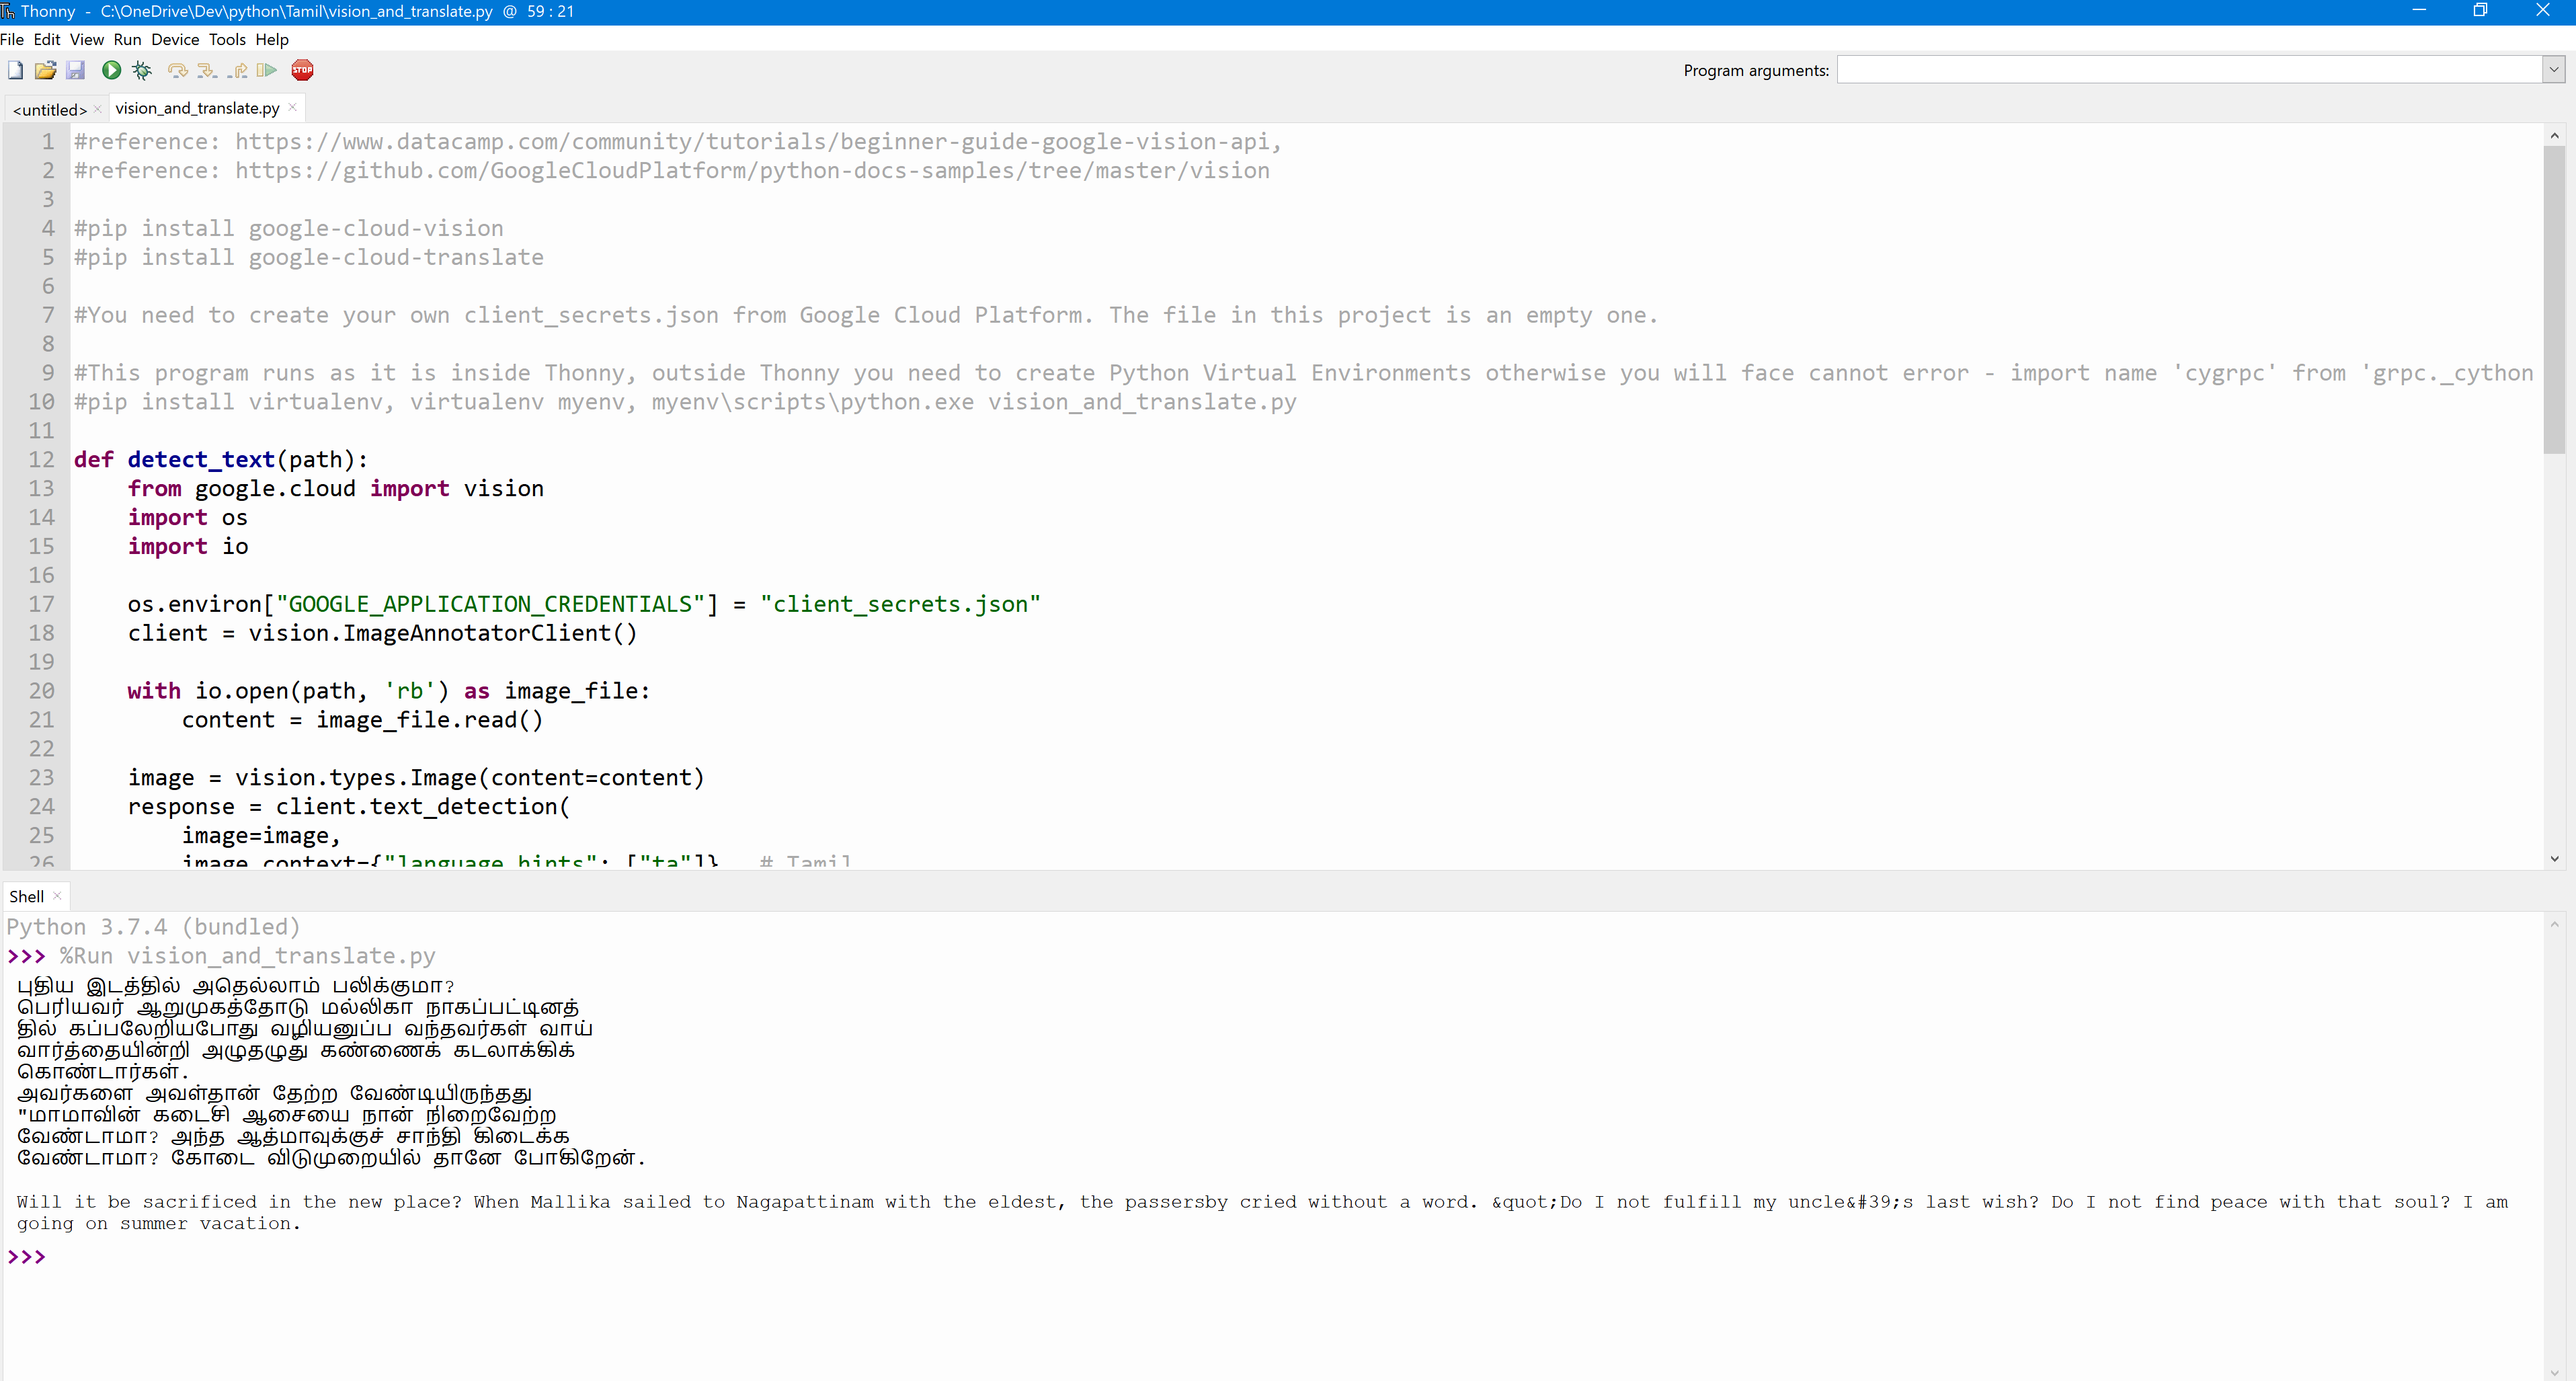 Python code using Google Cloud Vision API working fine in Thonny IDE